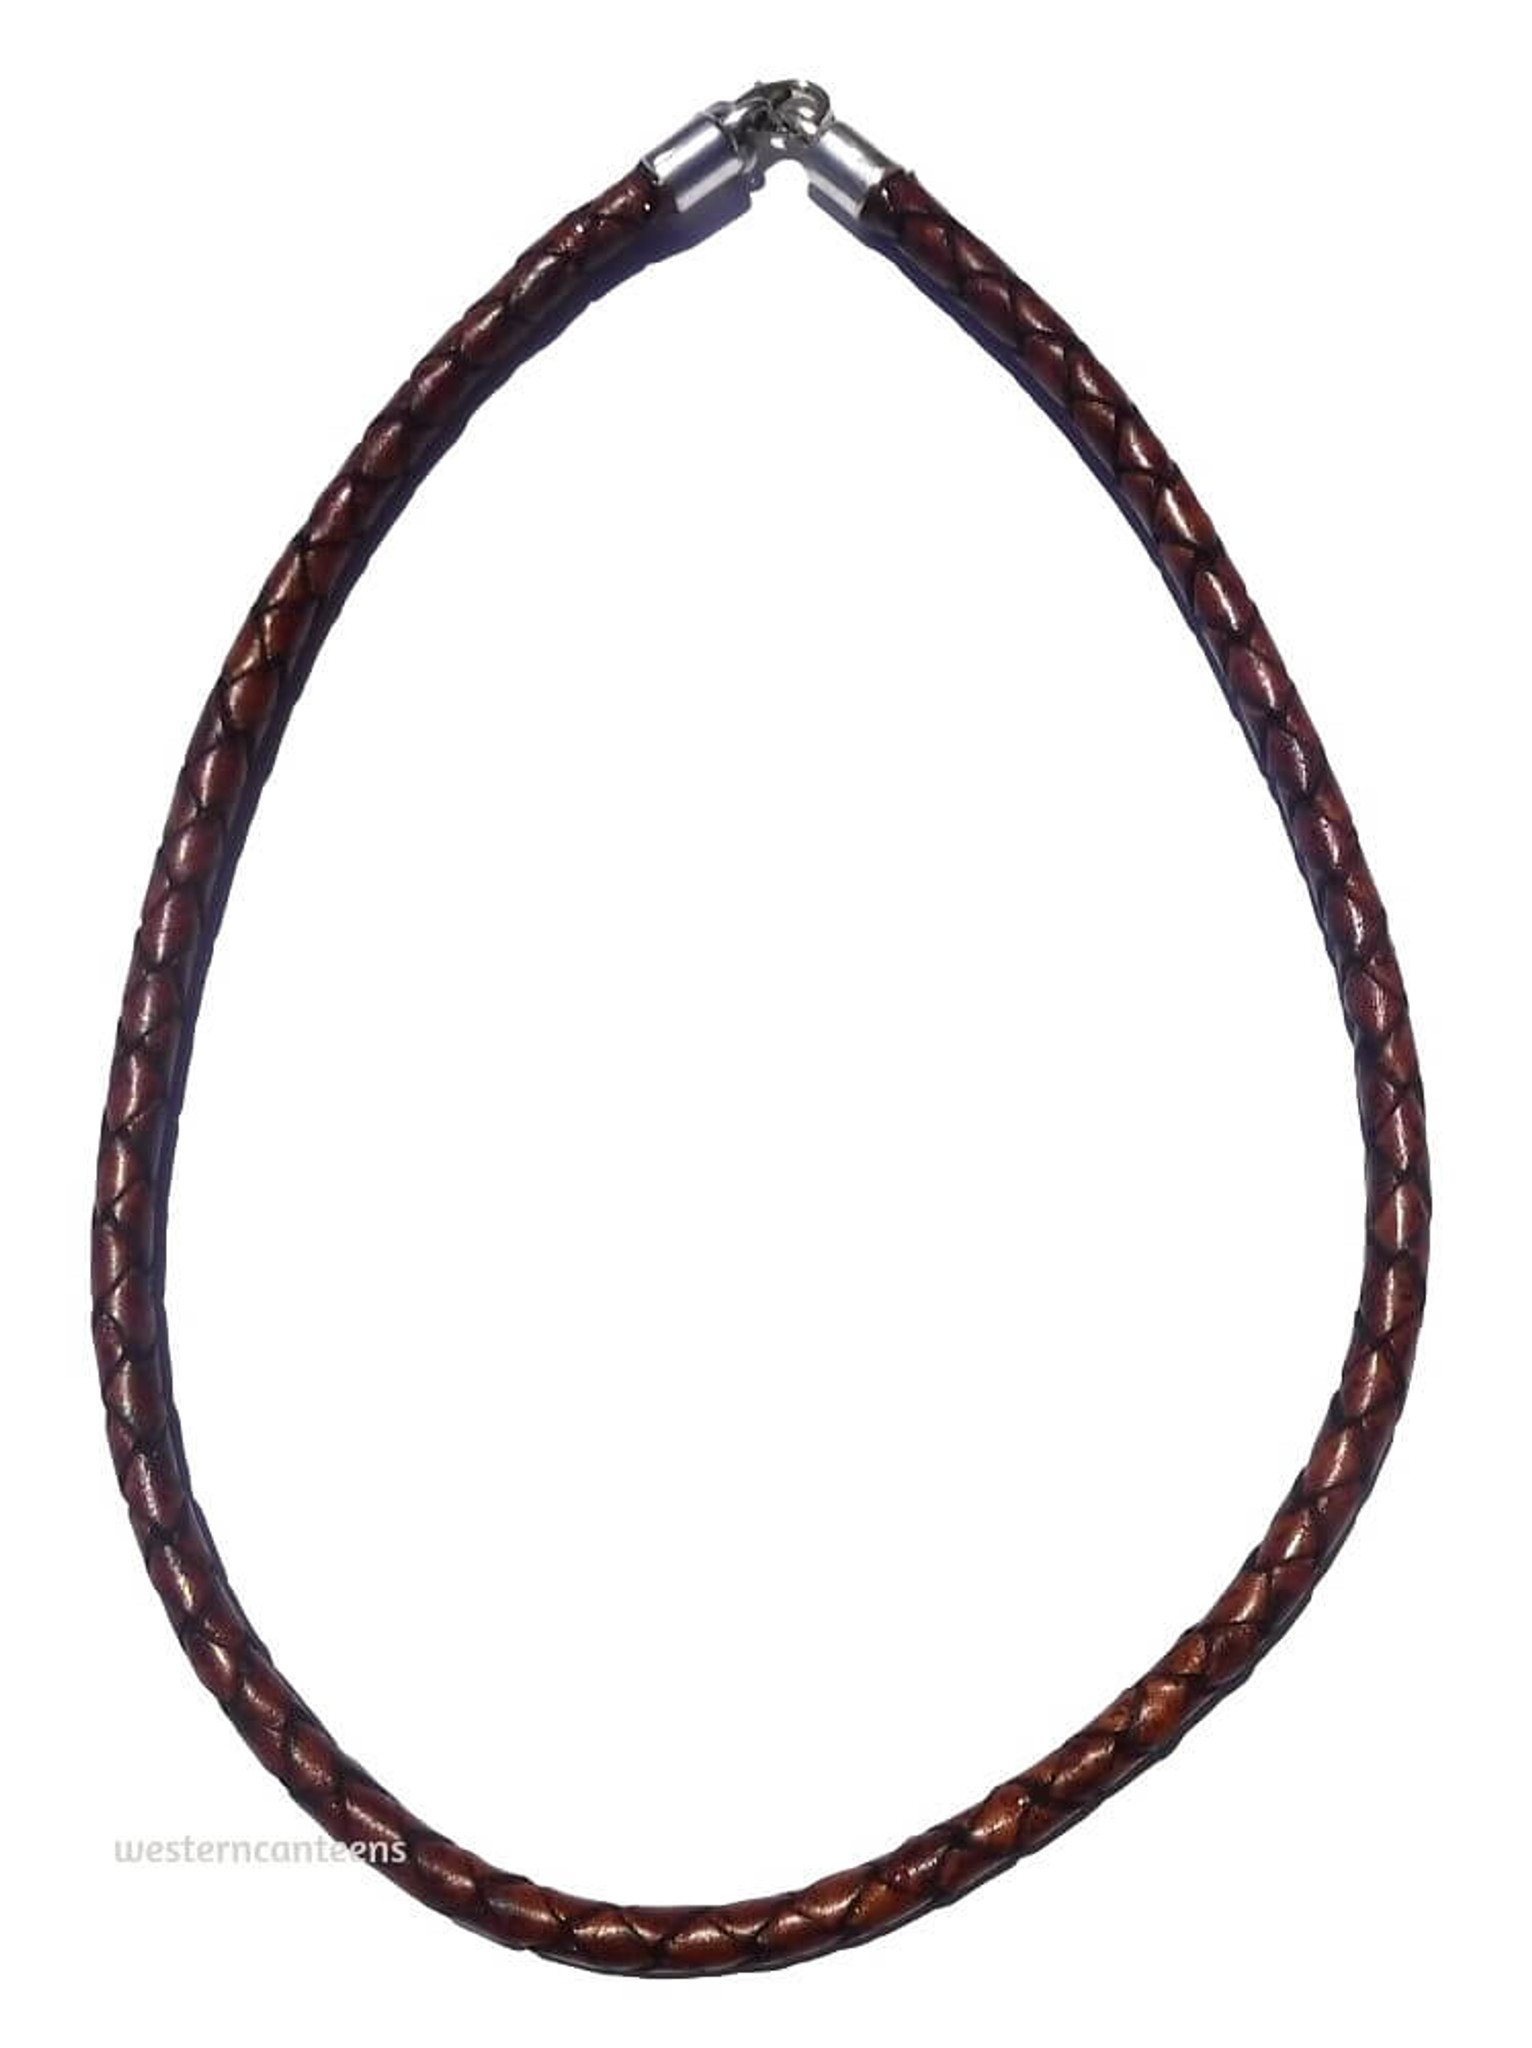 Antique Brown Braided Leather